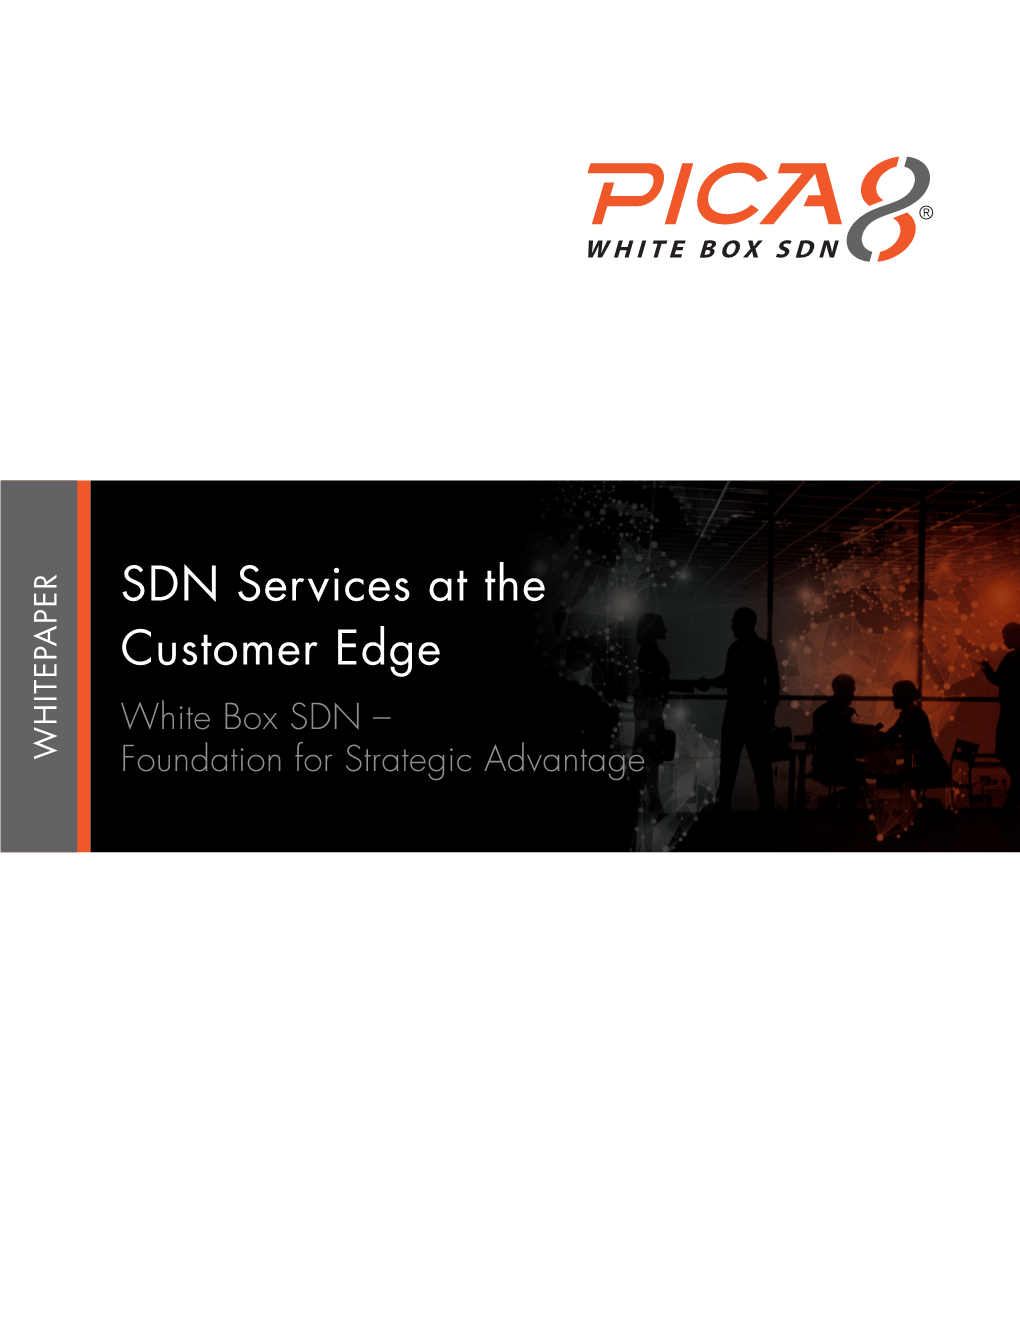 SDN Services at the Customer Edge